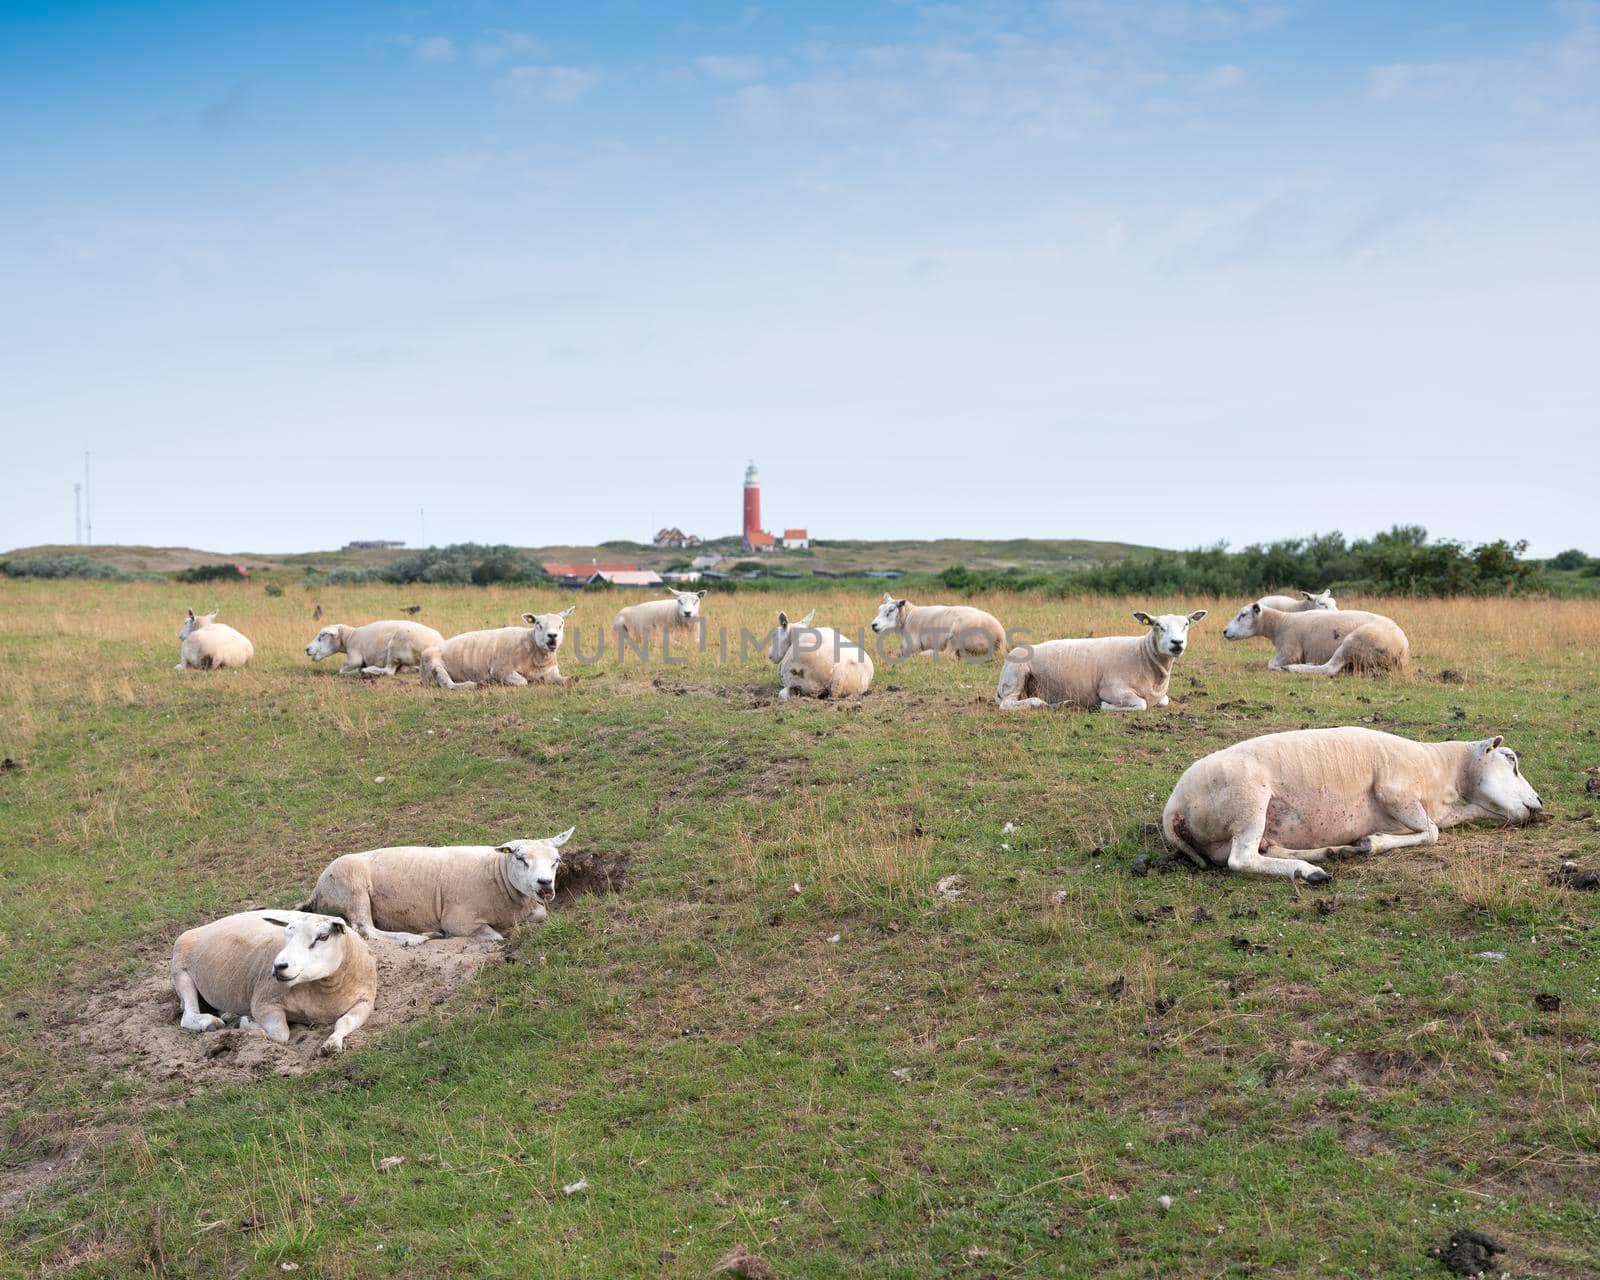 sheep in grass on dike near de cocksdorp and lighthouse on dutch island of texel in the netherlands by ahavelaar